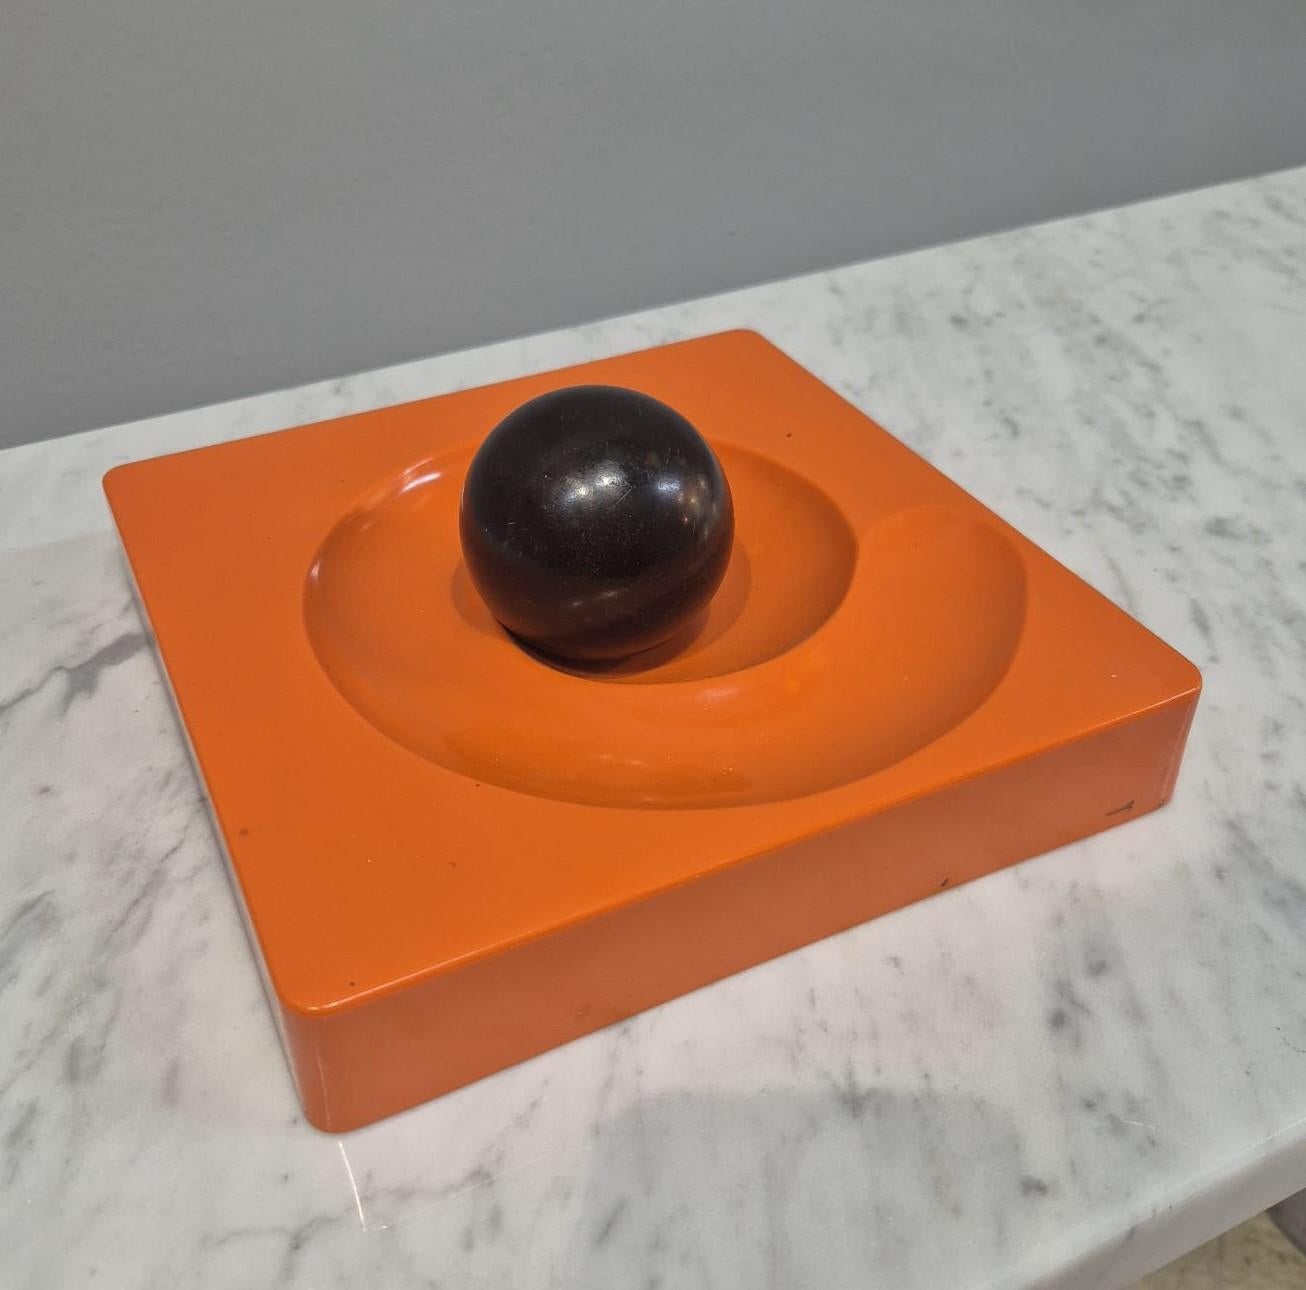 Spiros ashtray in orange plastic by Peduzzi Riva for Artemide, 1960s.
Spiros ashtray with square black plastic base on which is a spiral and in the center is the original black Ball.
The ball runs in the spiral and puts out the cigarette.
Designed